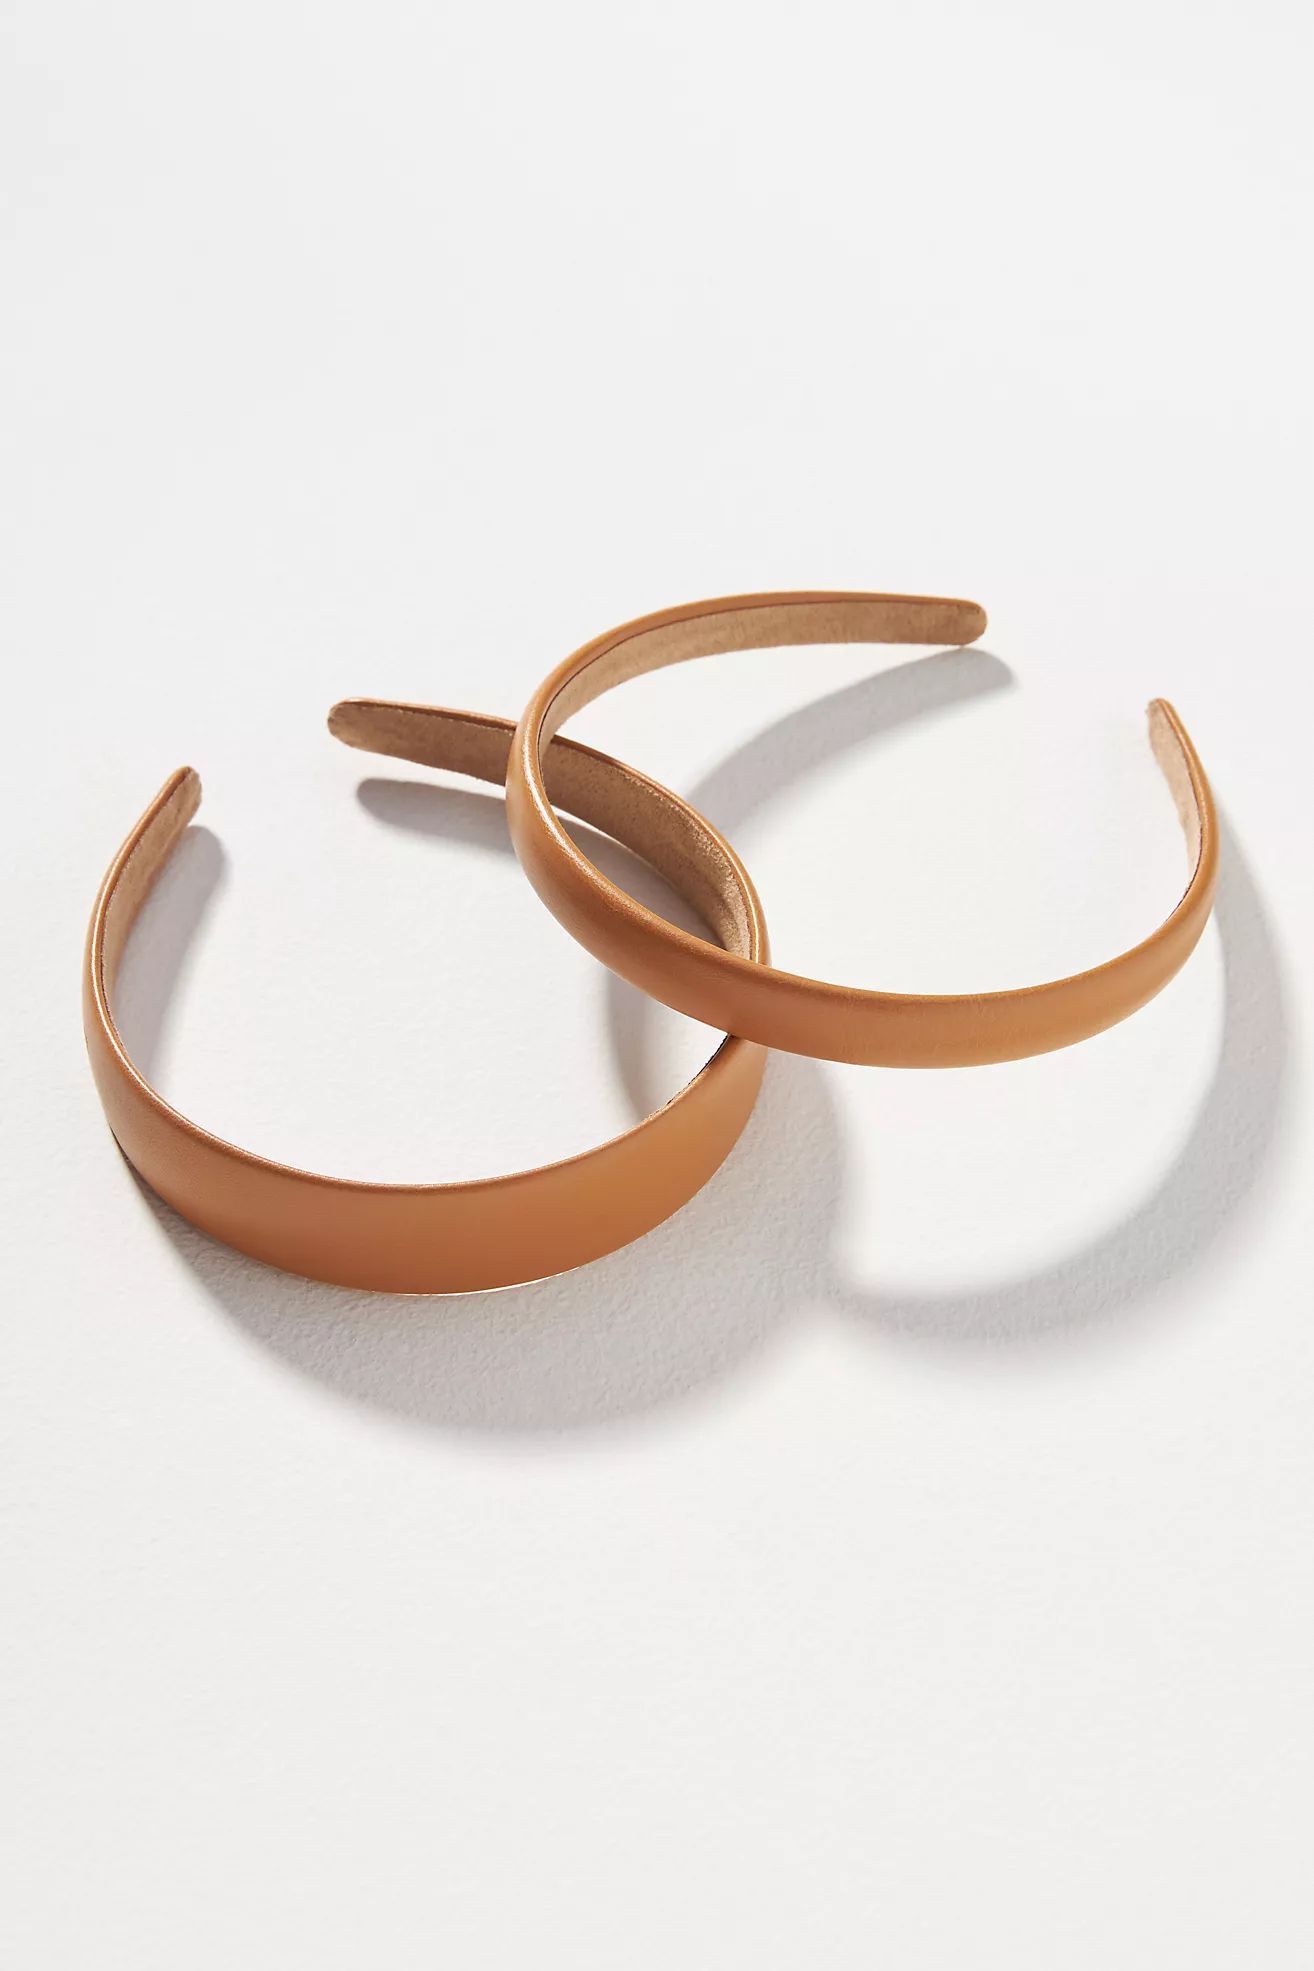 Corinne Faux Leather Headbands, Set of 2 | Anthropologie (US)